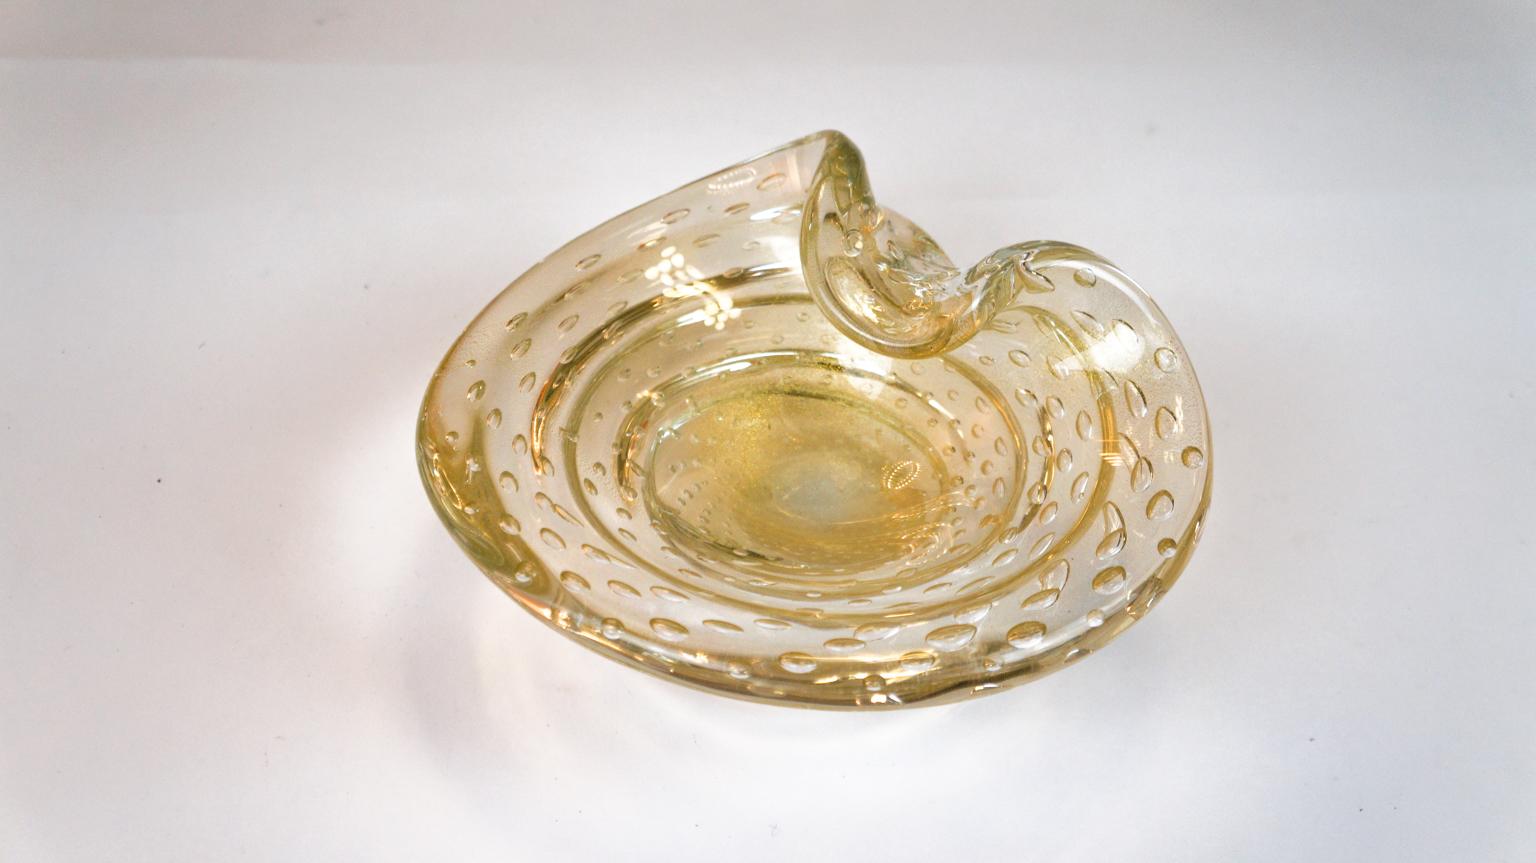 Beautiful Murano glass bowl colour crystal covered with gold leaf 24-carat and bubbles called Balloton.
The process of Venetian blown glass is completely performed by Murano artisans.
Designed by the master Alberto Dona' in 1980

Touching the